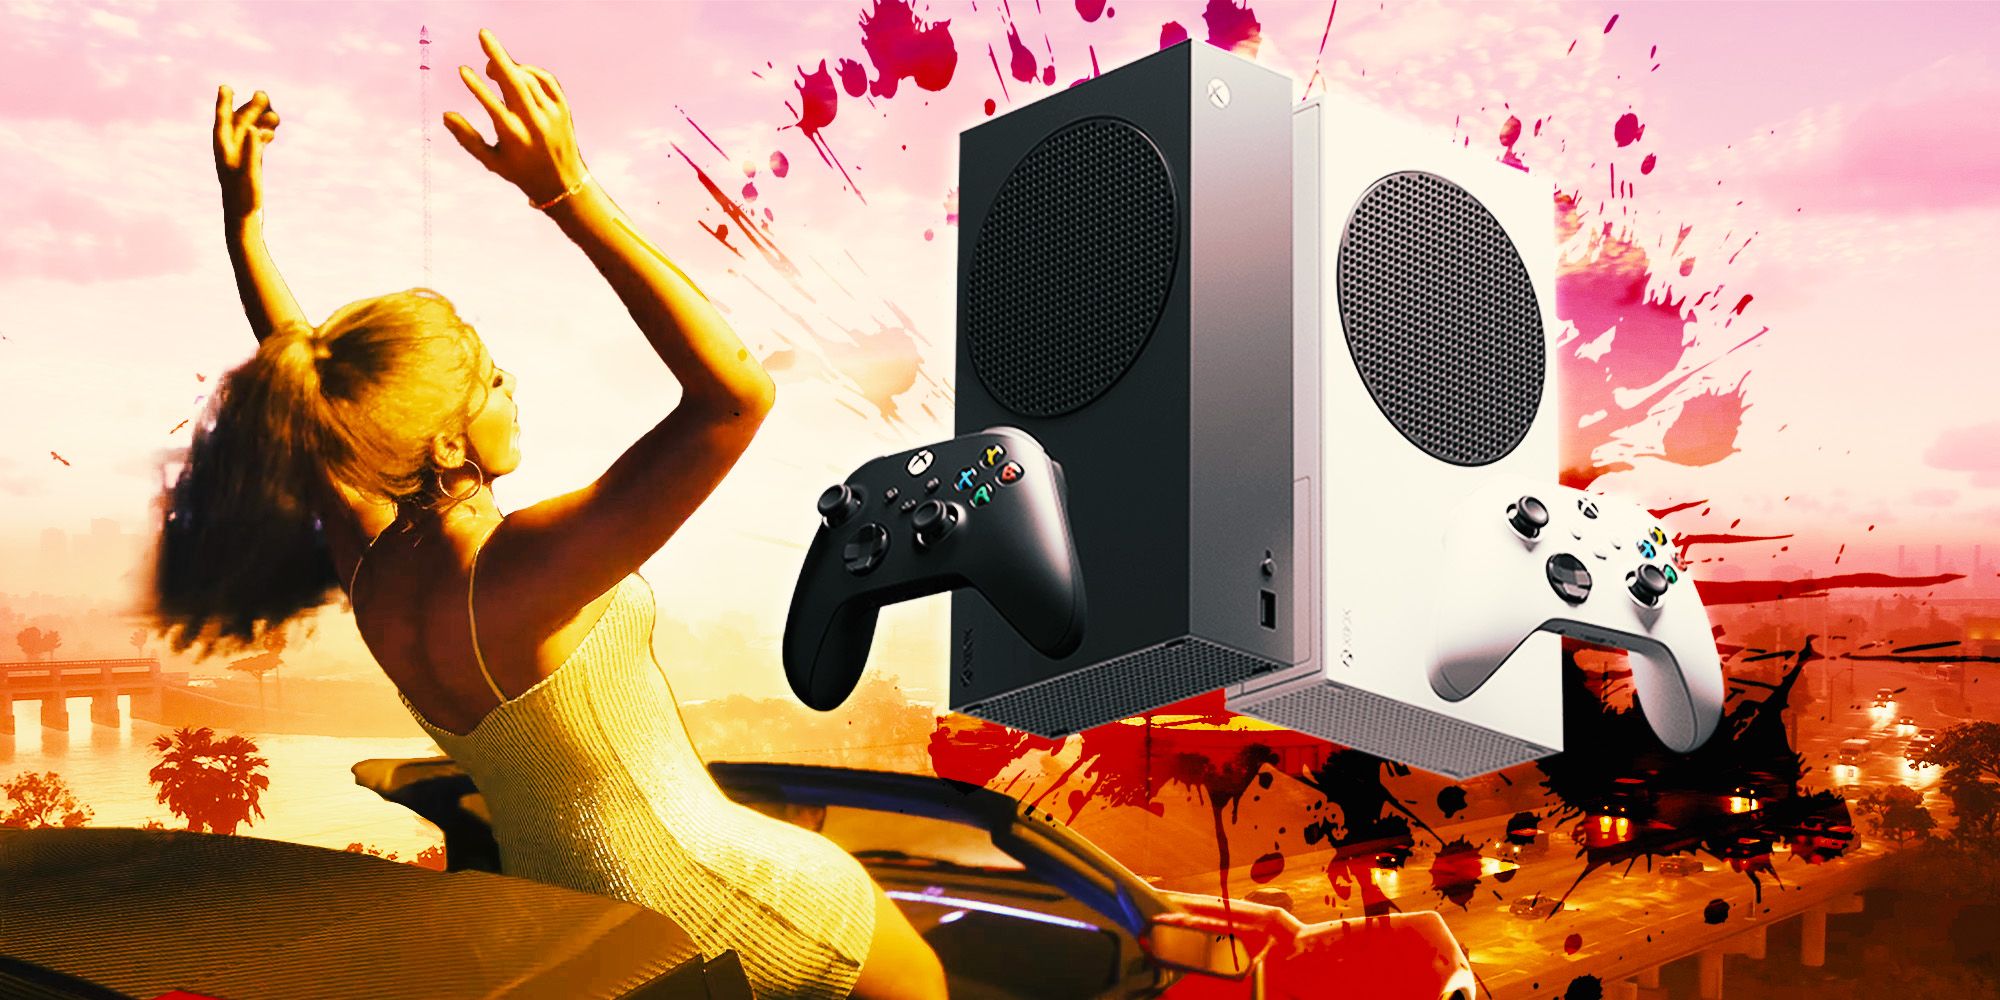 GTA 6's Lucia leans back in a convertible on a Vice City highway, arms in the air. Next to her are images of the Xbox Series X and S, surrounded by a red splatter.